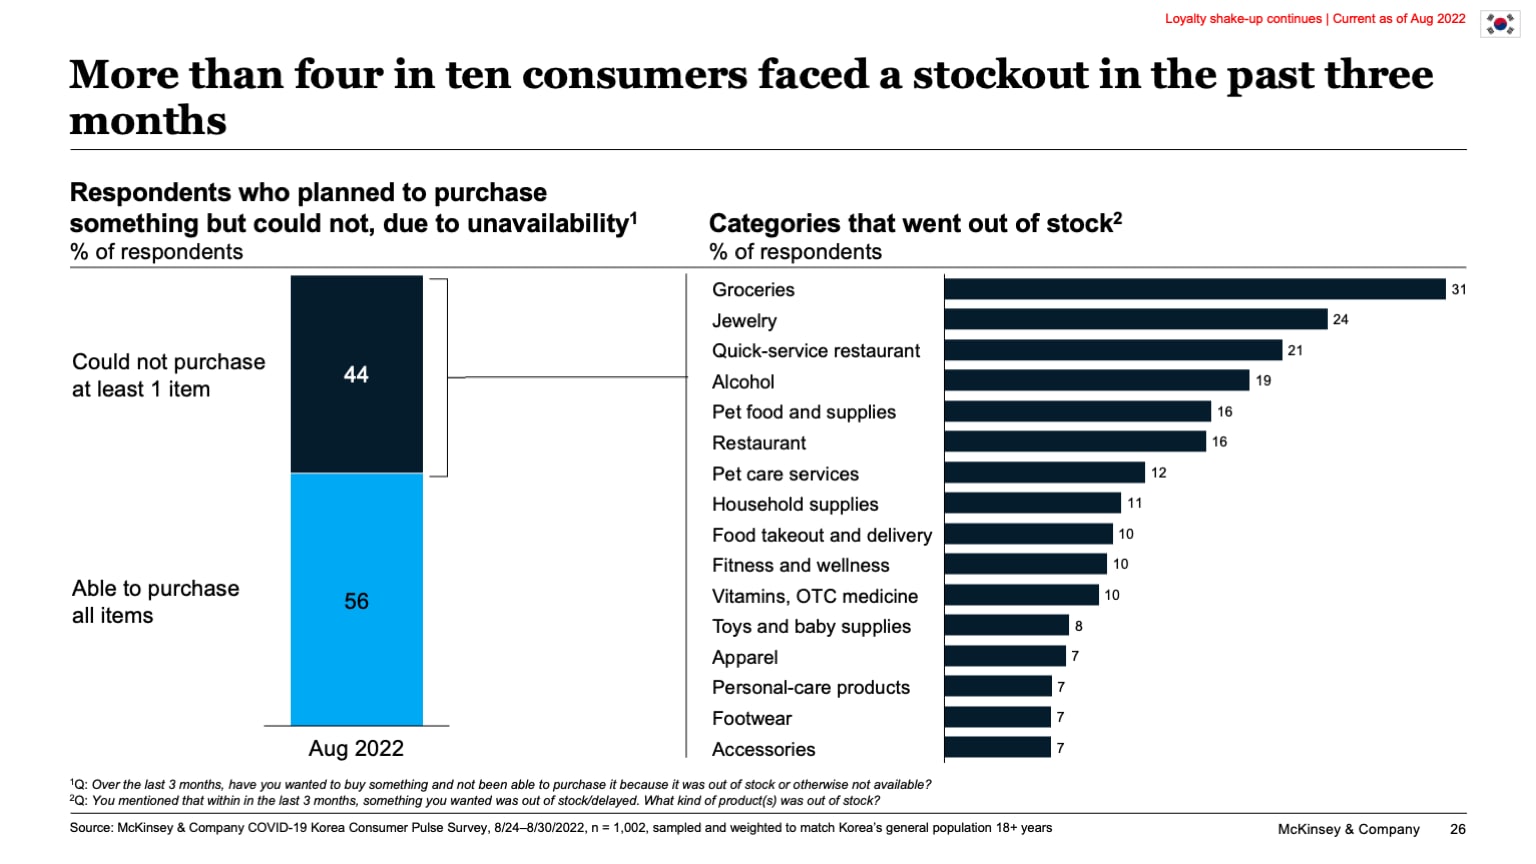 More than four in ten consumers faced a stockout in the past three months